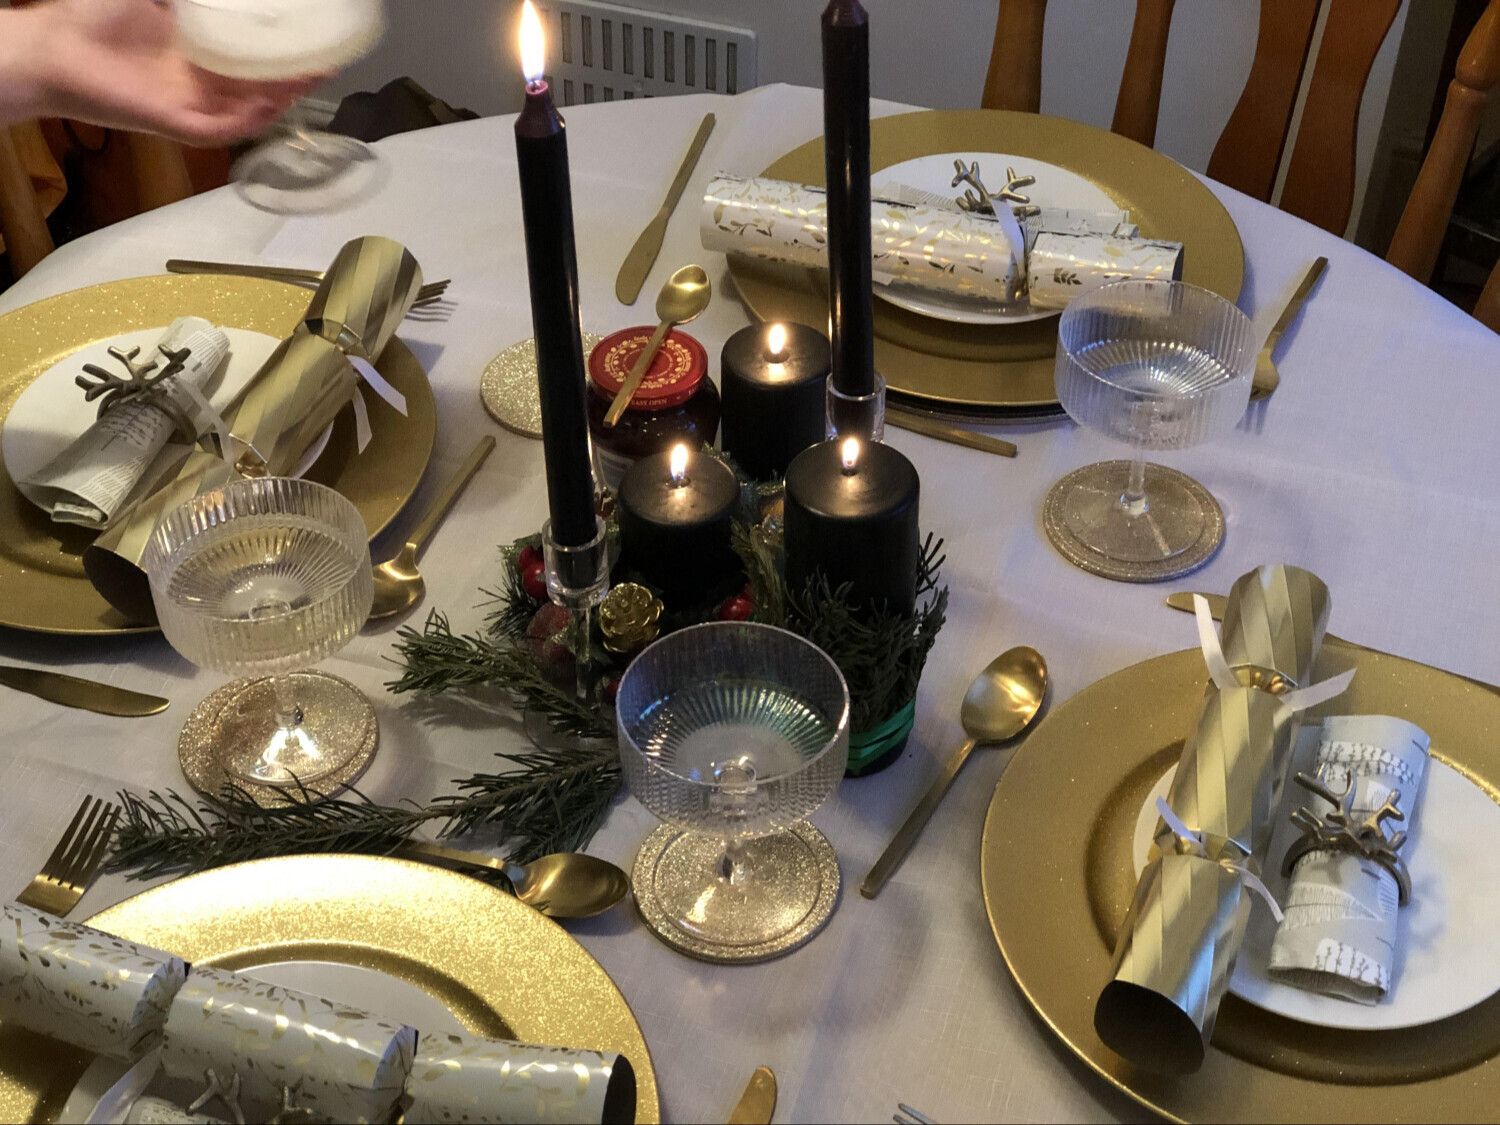 Set table with Christmas crackers on the plates